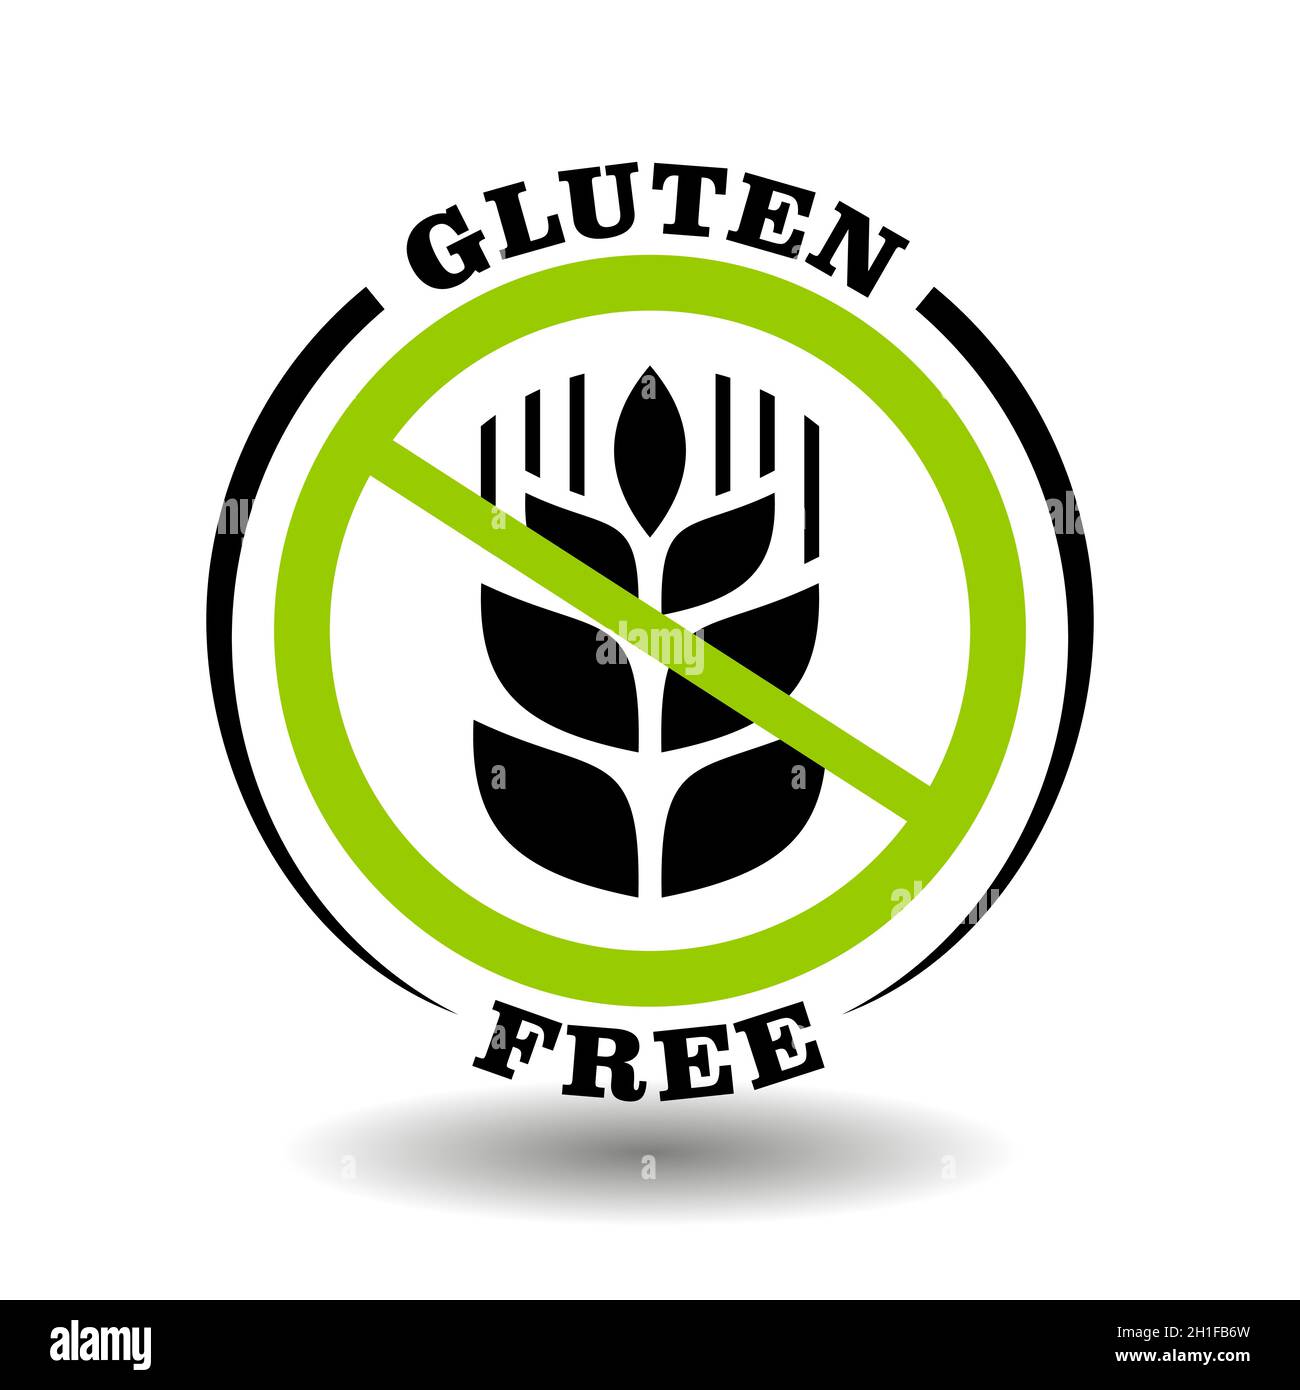 Round icon Gluten free with prohibited wheat ear for healthy food packaging. Circle label with simple corn sign for no gluten meal pictograms Stock Vector